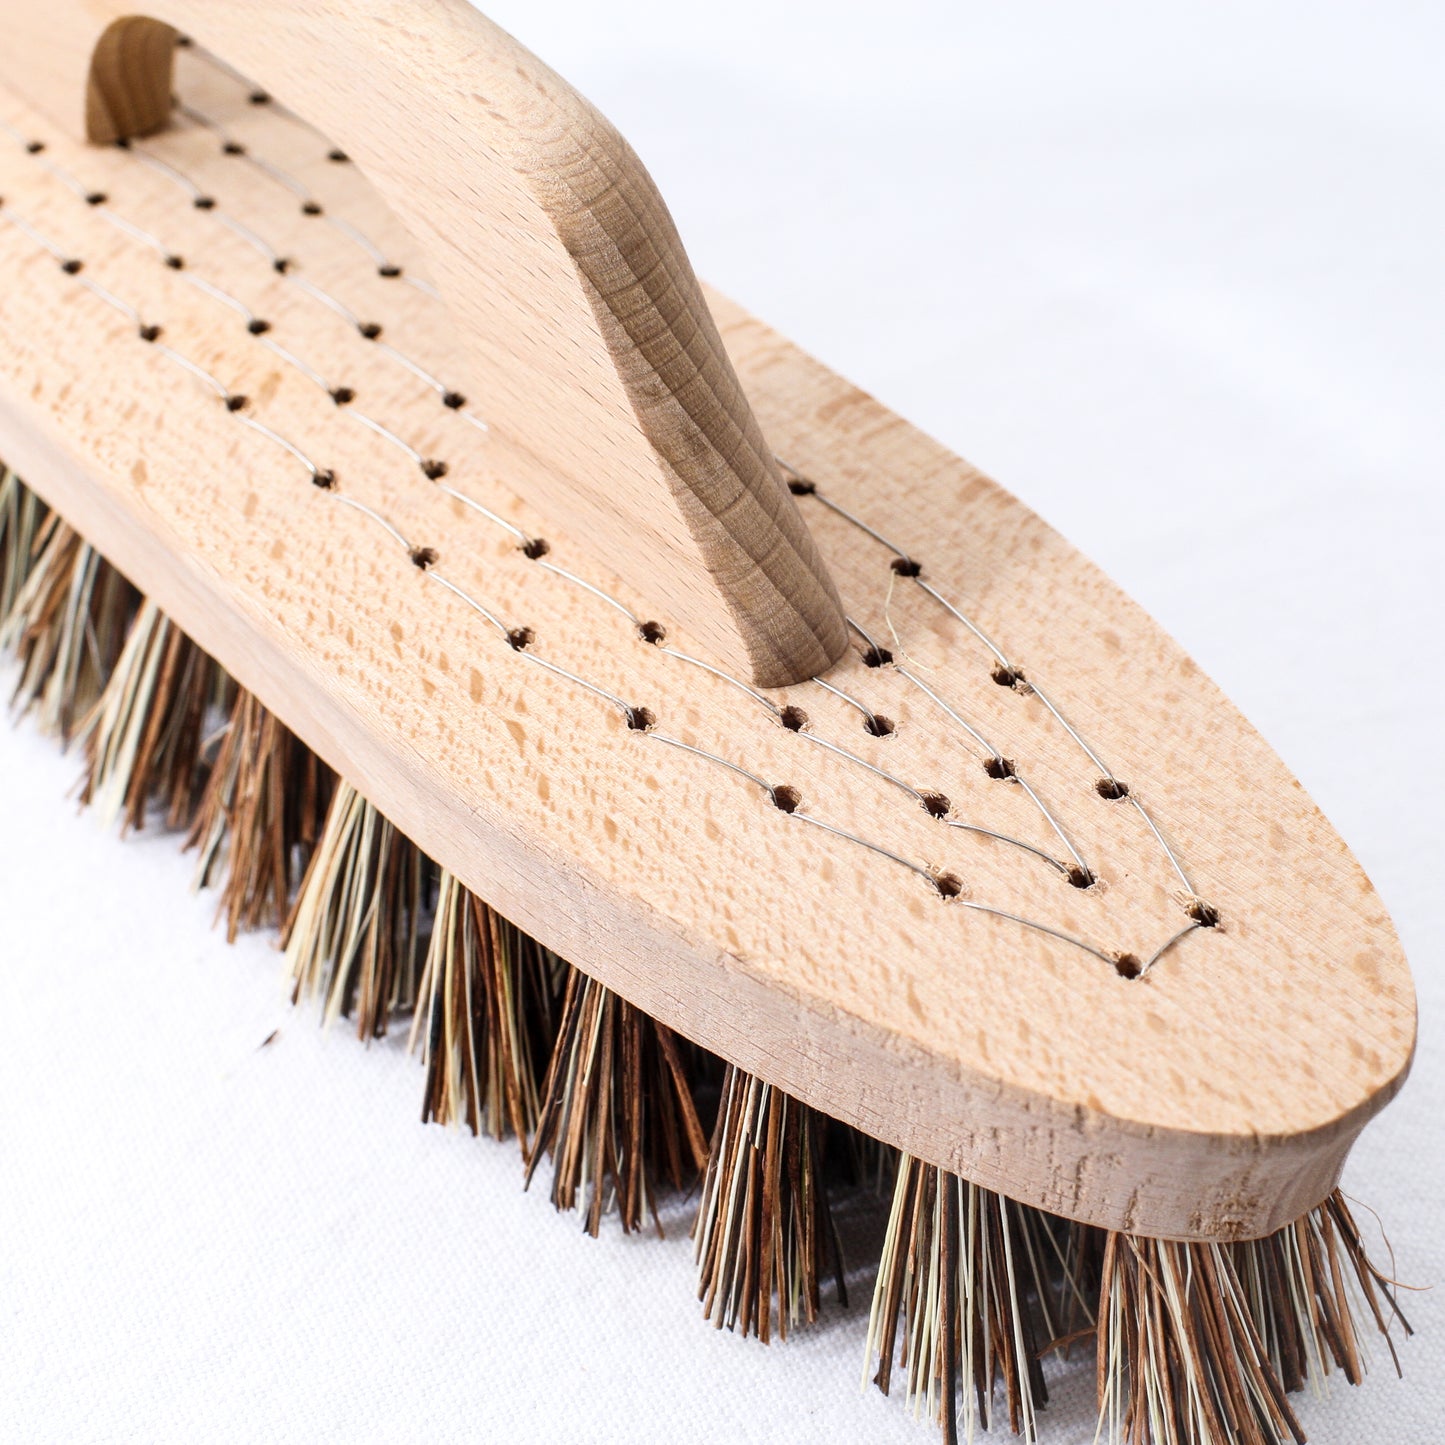 Scrubbing Brush with handle